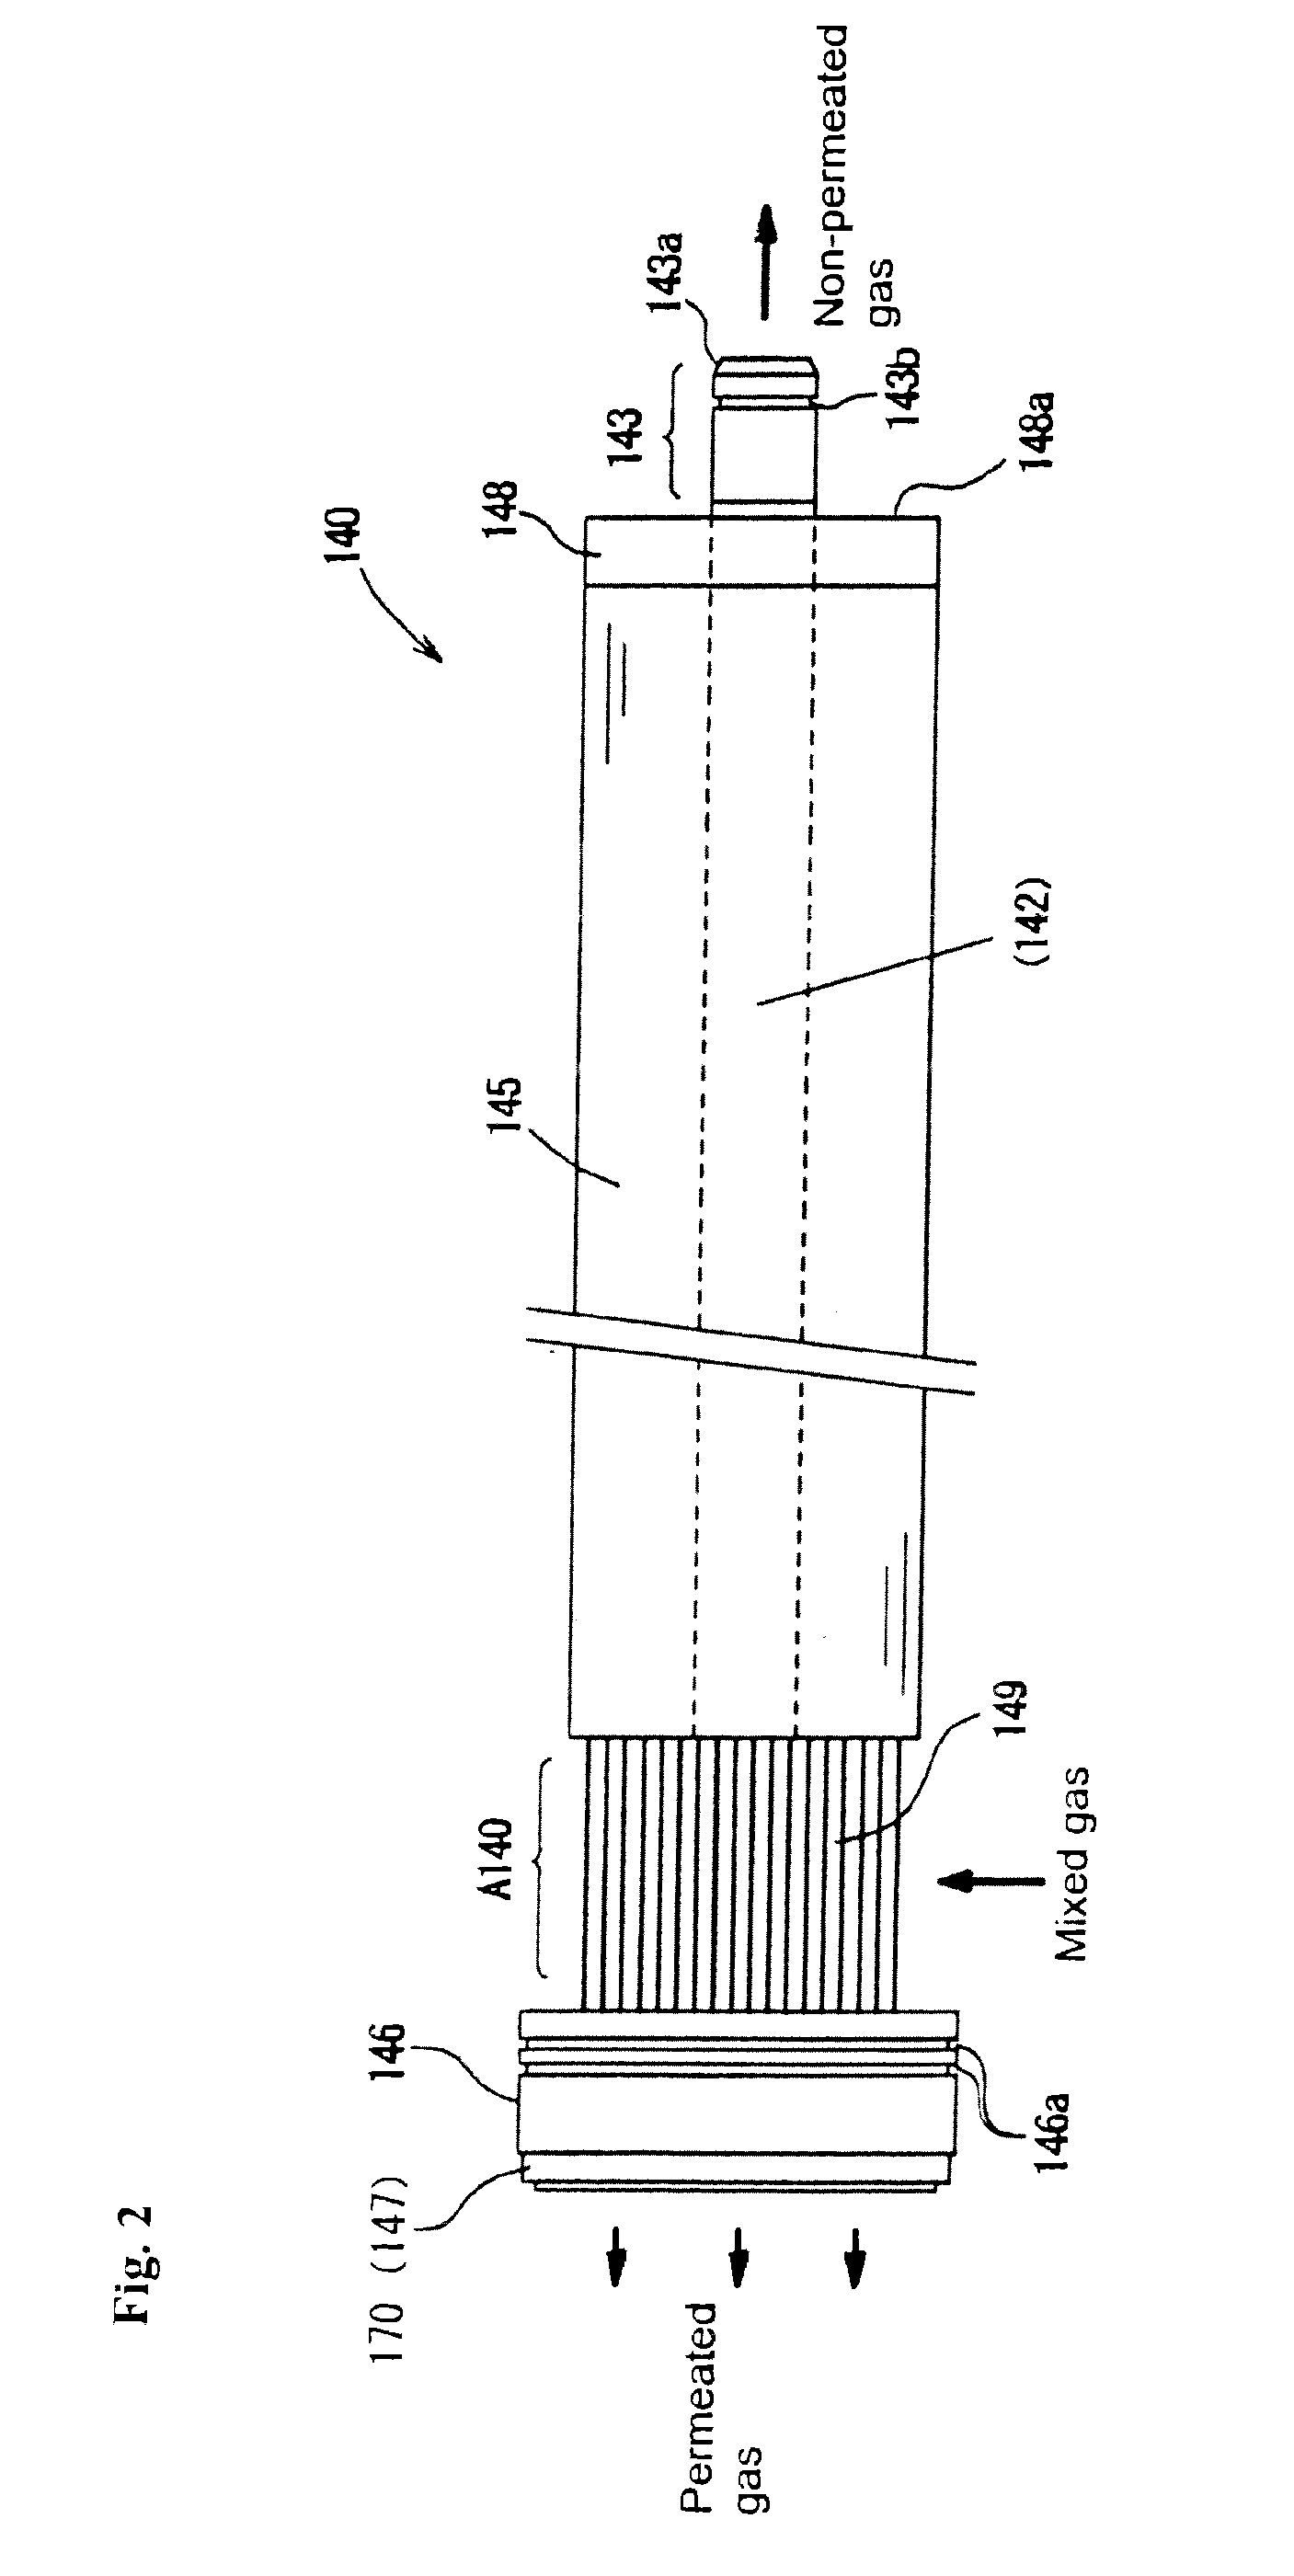 Gas separation membrane module and method of replacing a hollow fiber element